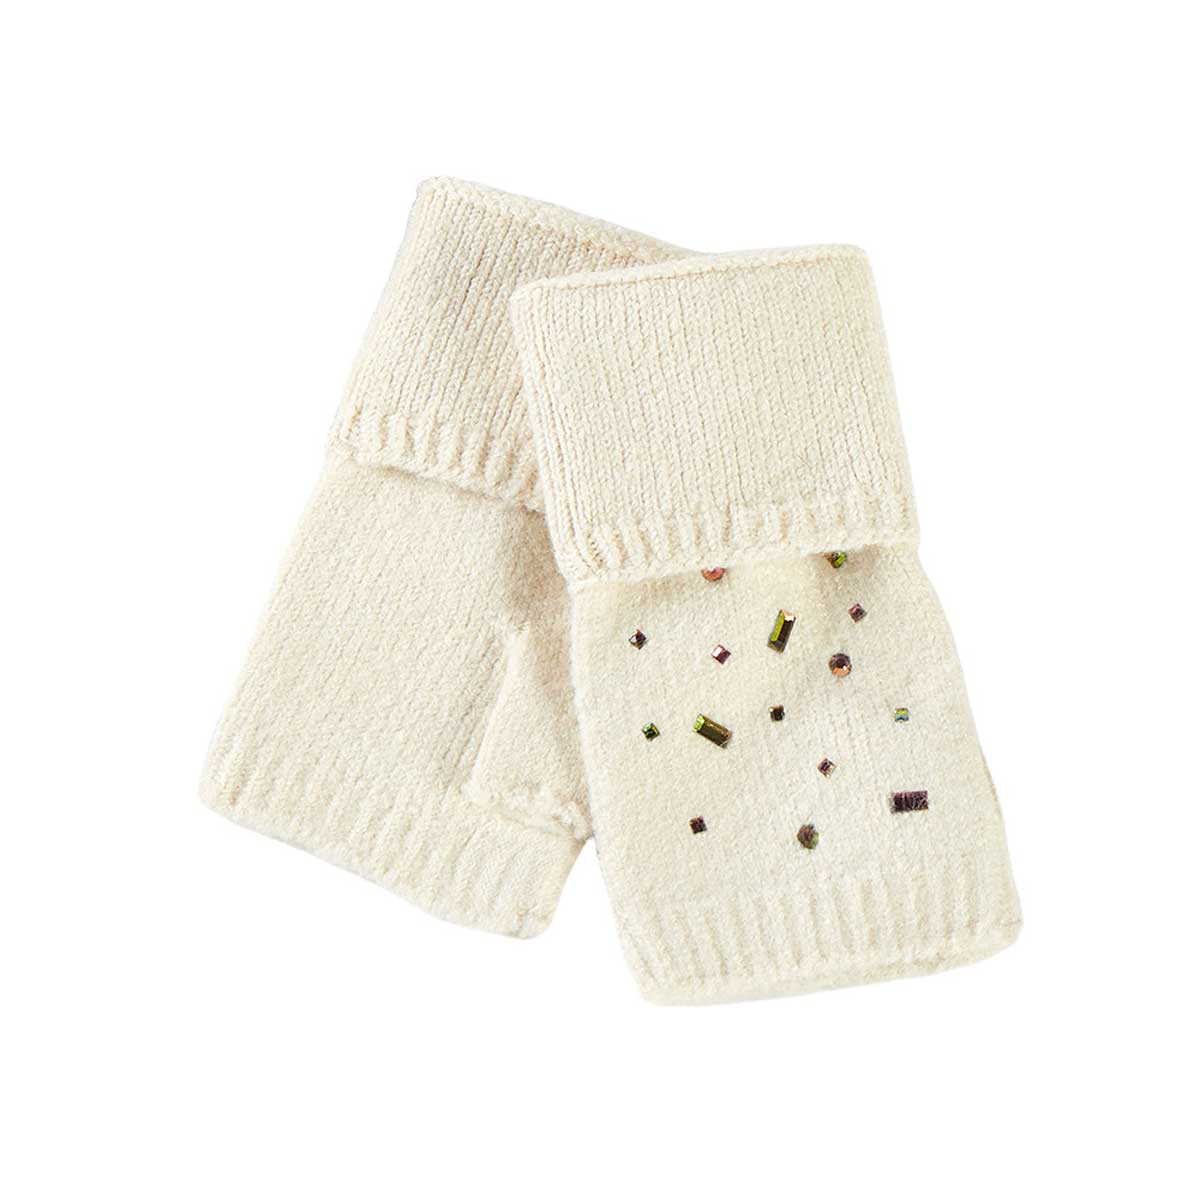 Beige Bling Stone Embellished Knit Fingerless Gloves, provide protection while keeping hands warm, featuring bling stone embellishments to make a stylish statement. Wear gloves or a cover-up as a mitten to make your outfit gorgeous with luxe and comfortability. A beautiful gift for the persons you care about the most. 